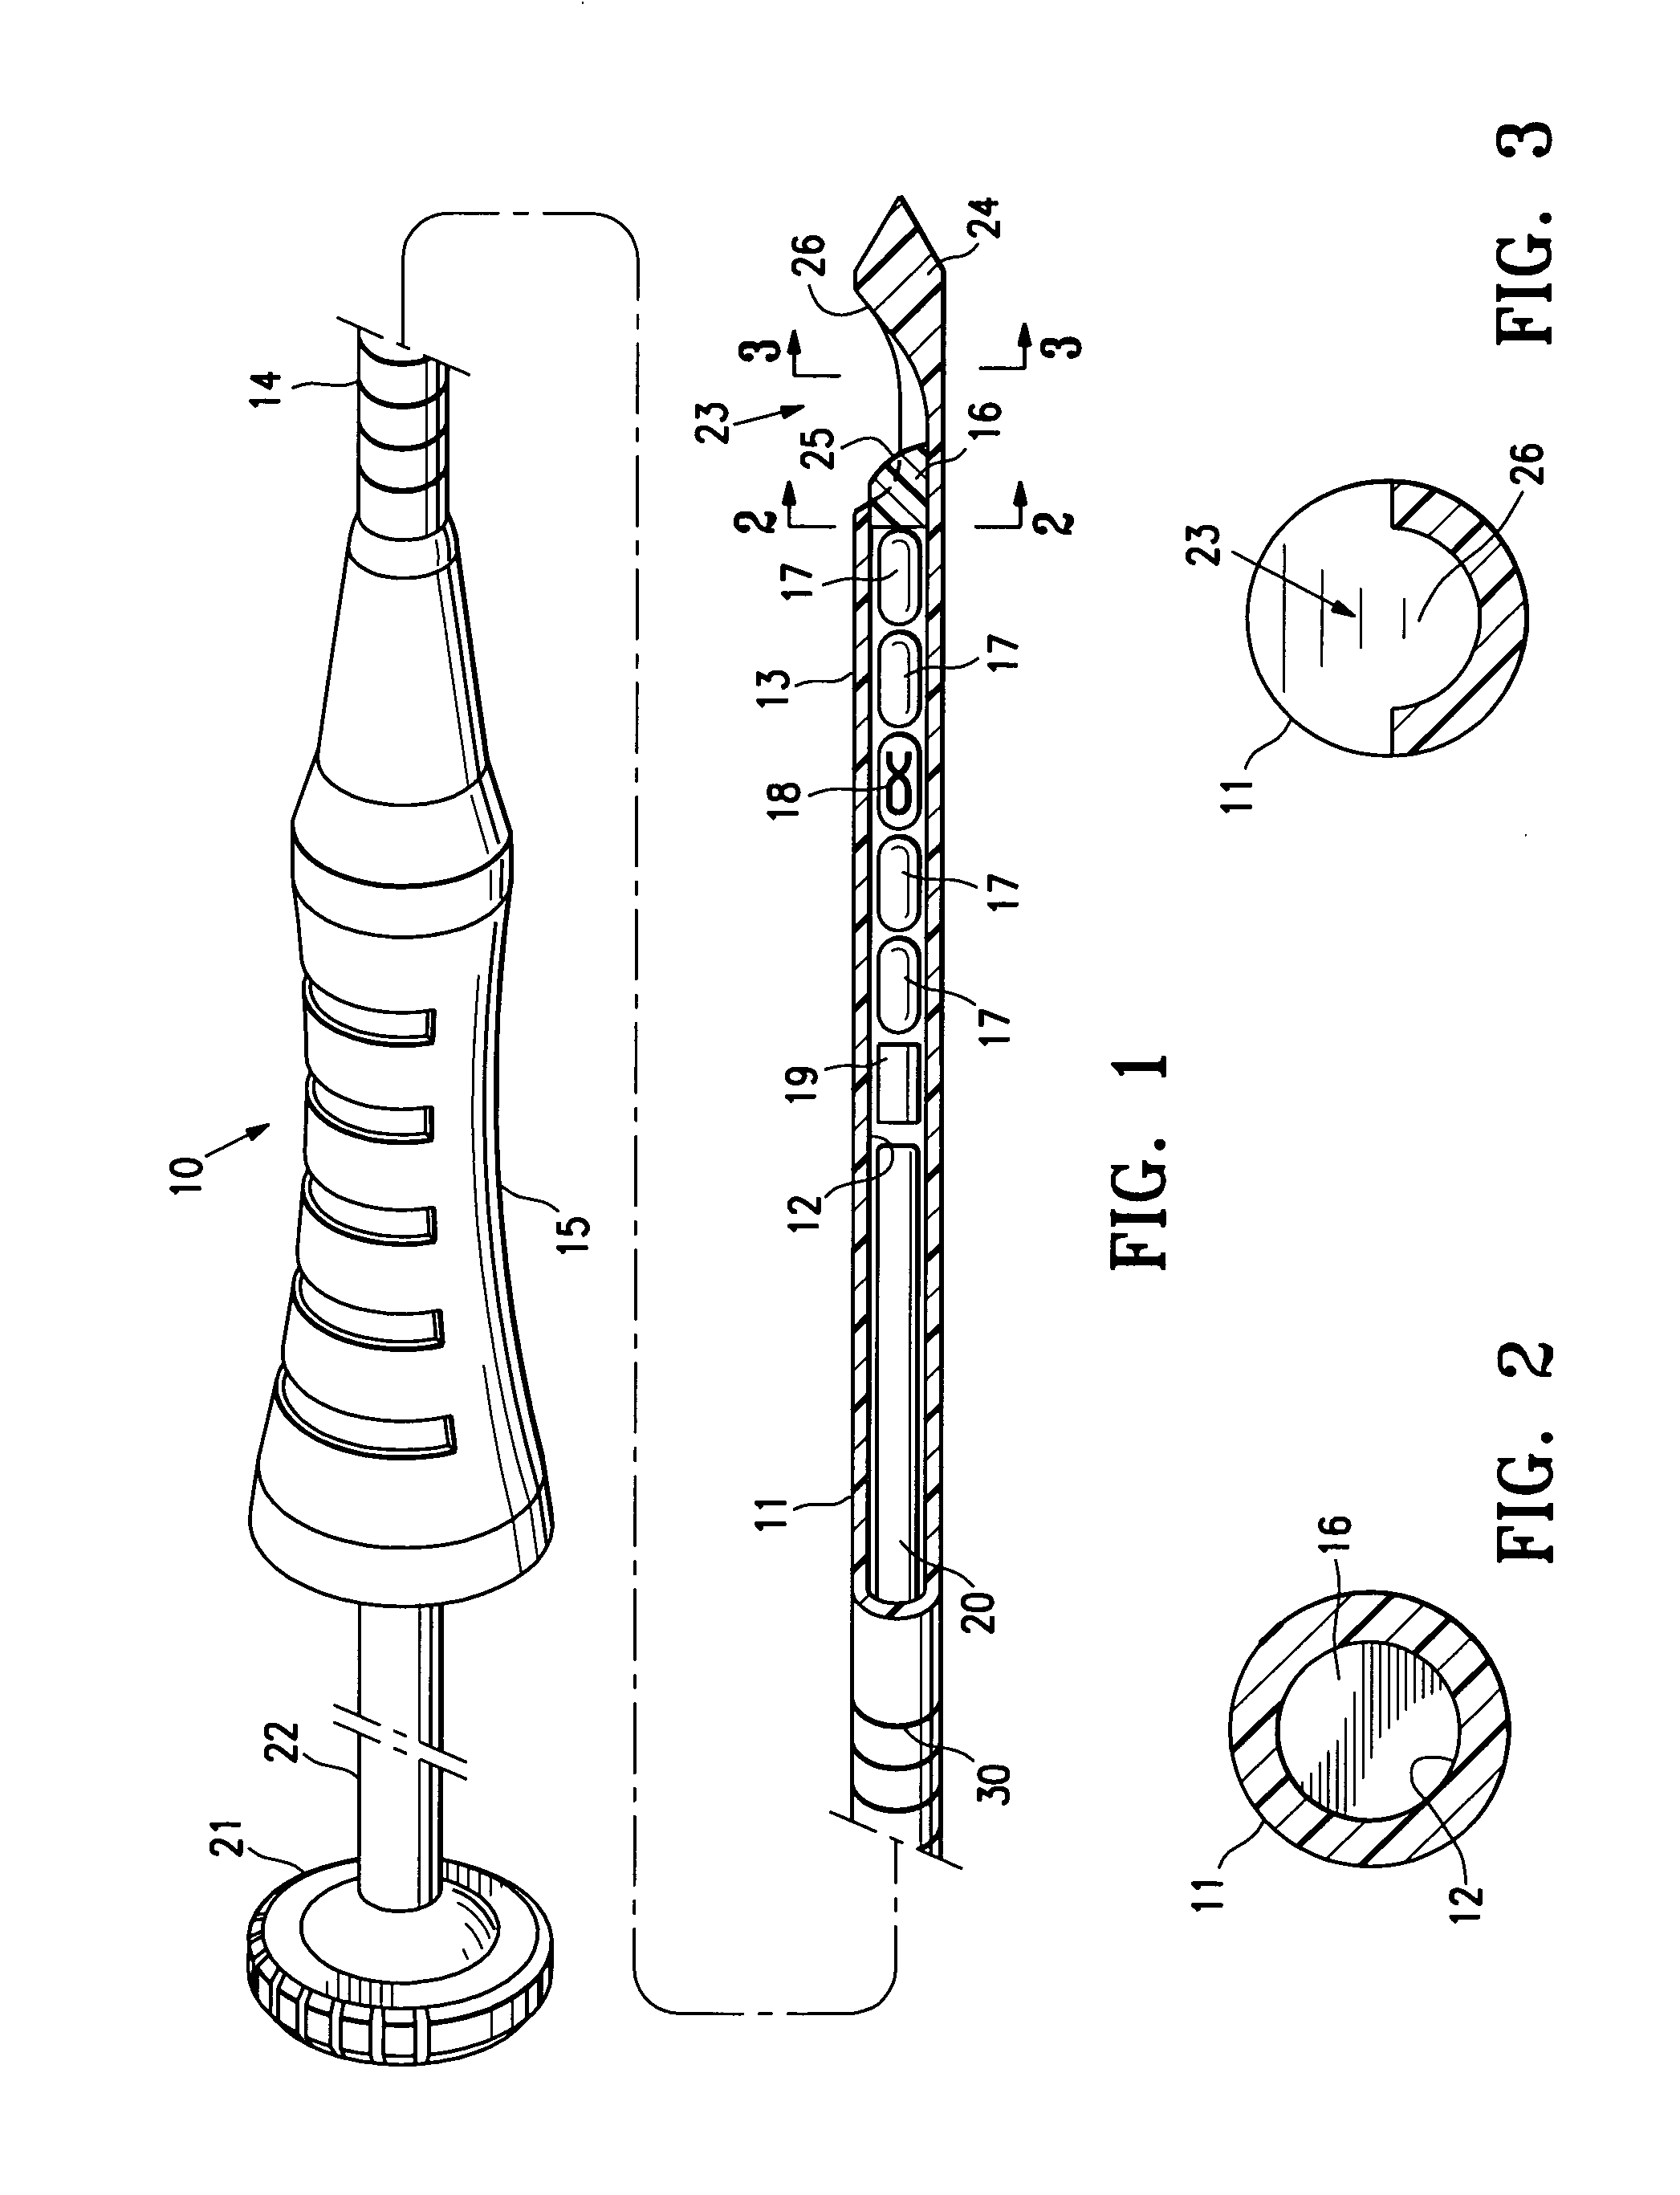 Assembly with hemostatic and radiographically detectable pellets